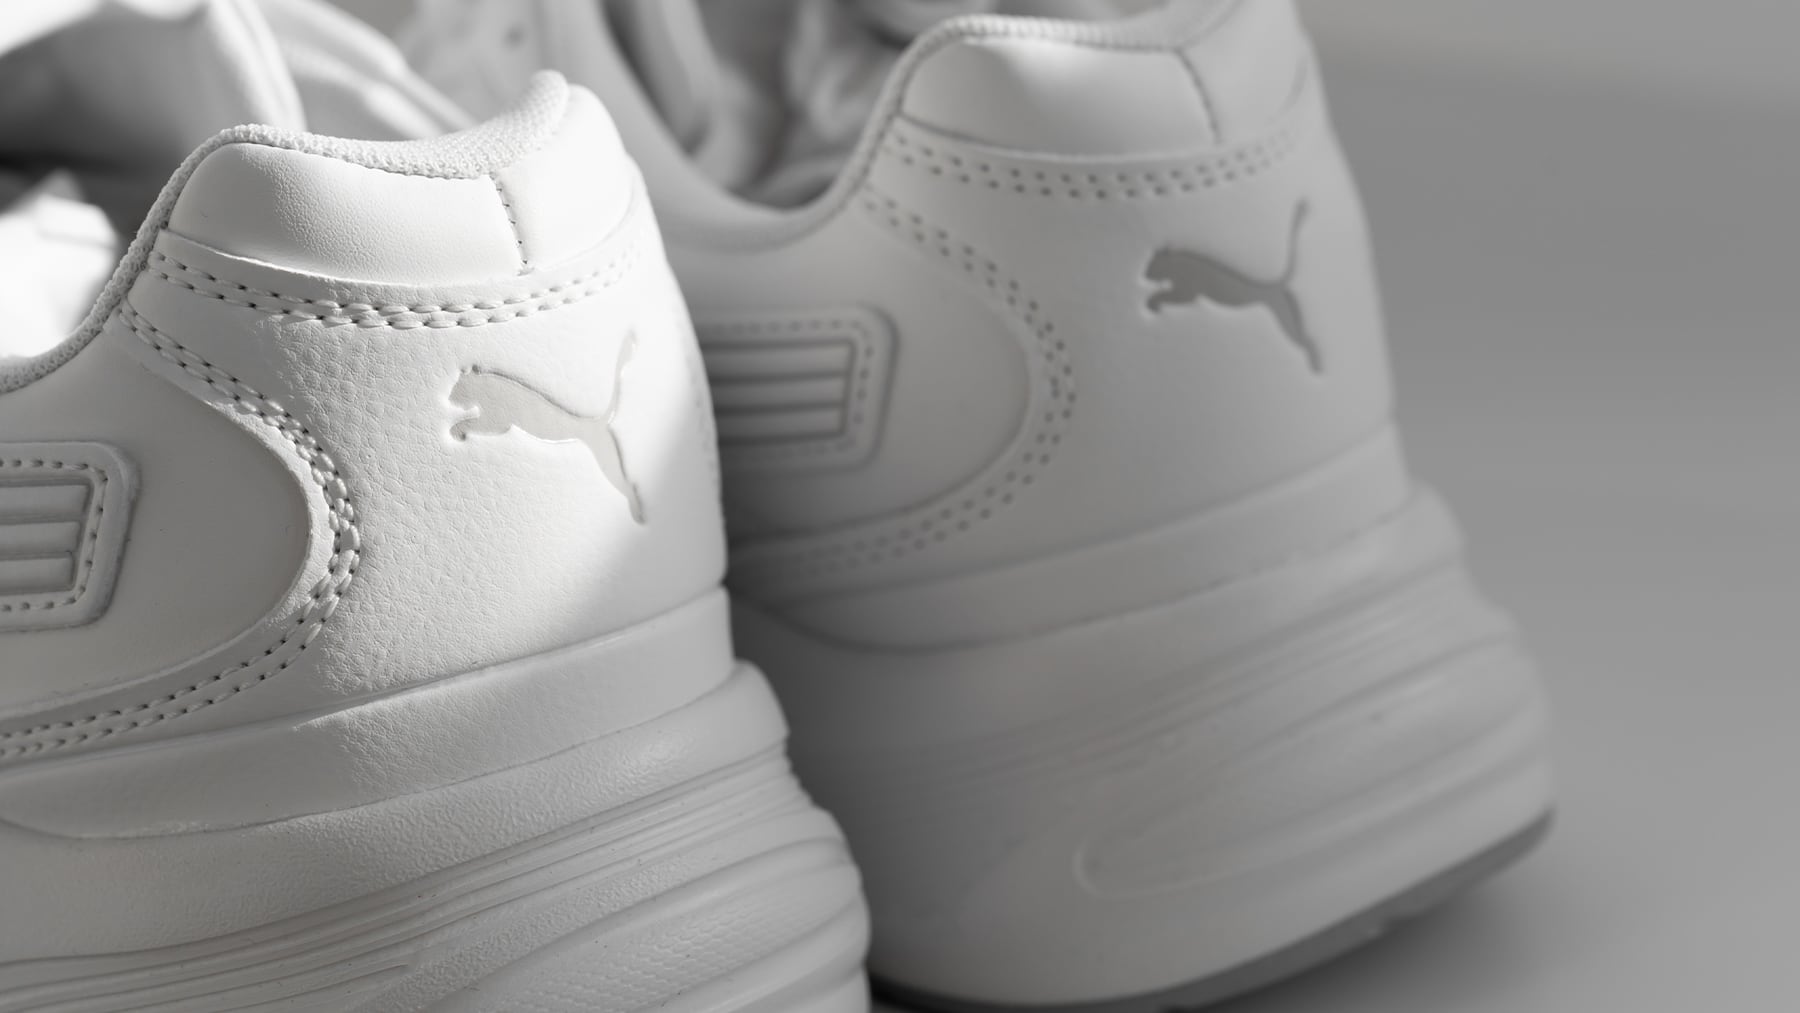 Puma Sees Sneaker Demand Picking Up in Second Half of Year